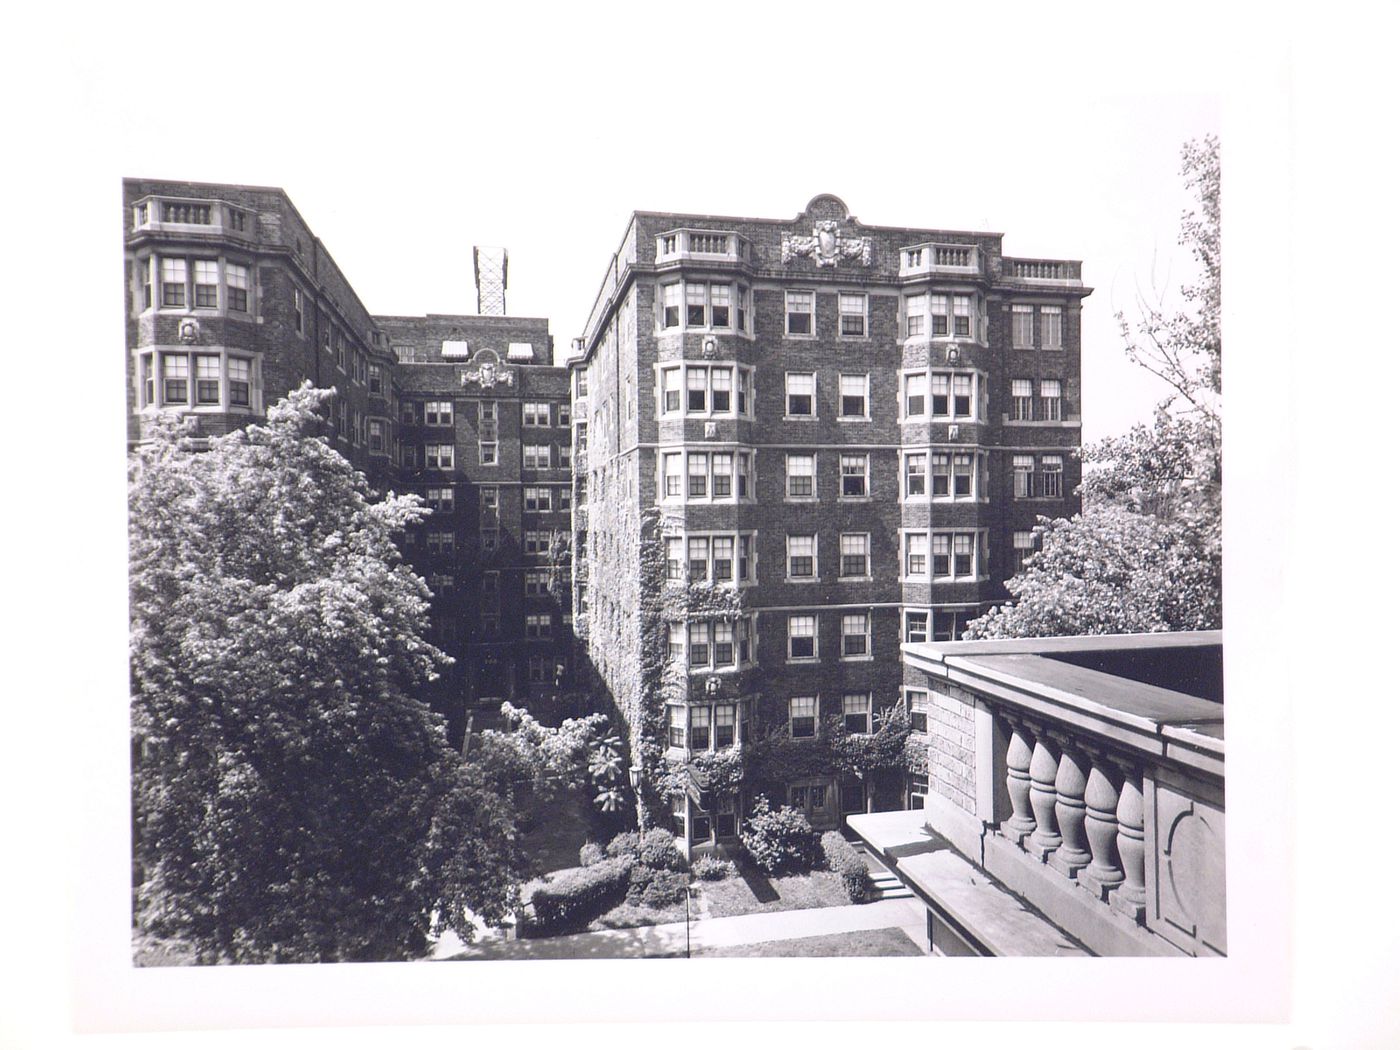 View of the principal façade of The Abington apartment house from the roof [?] of the building across the street, Detroit, Michigan